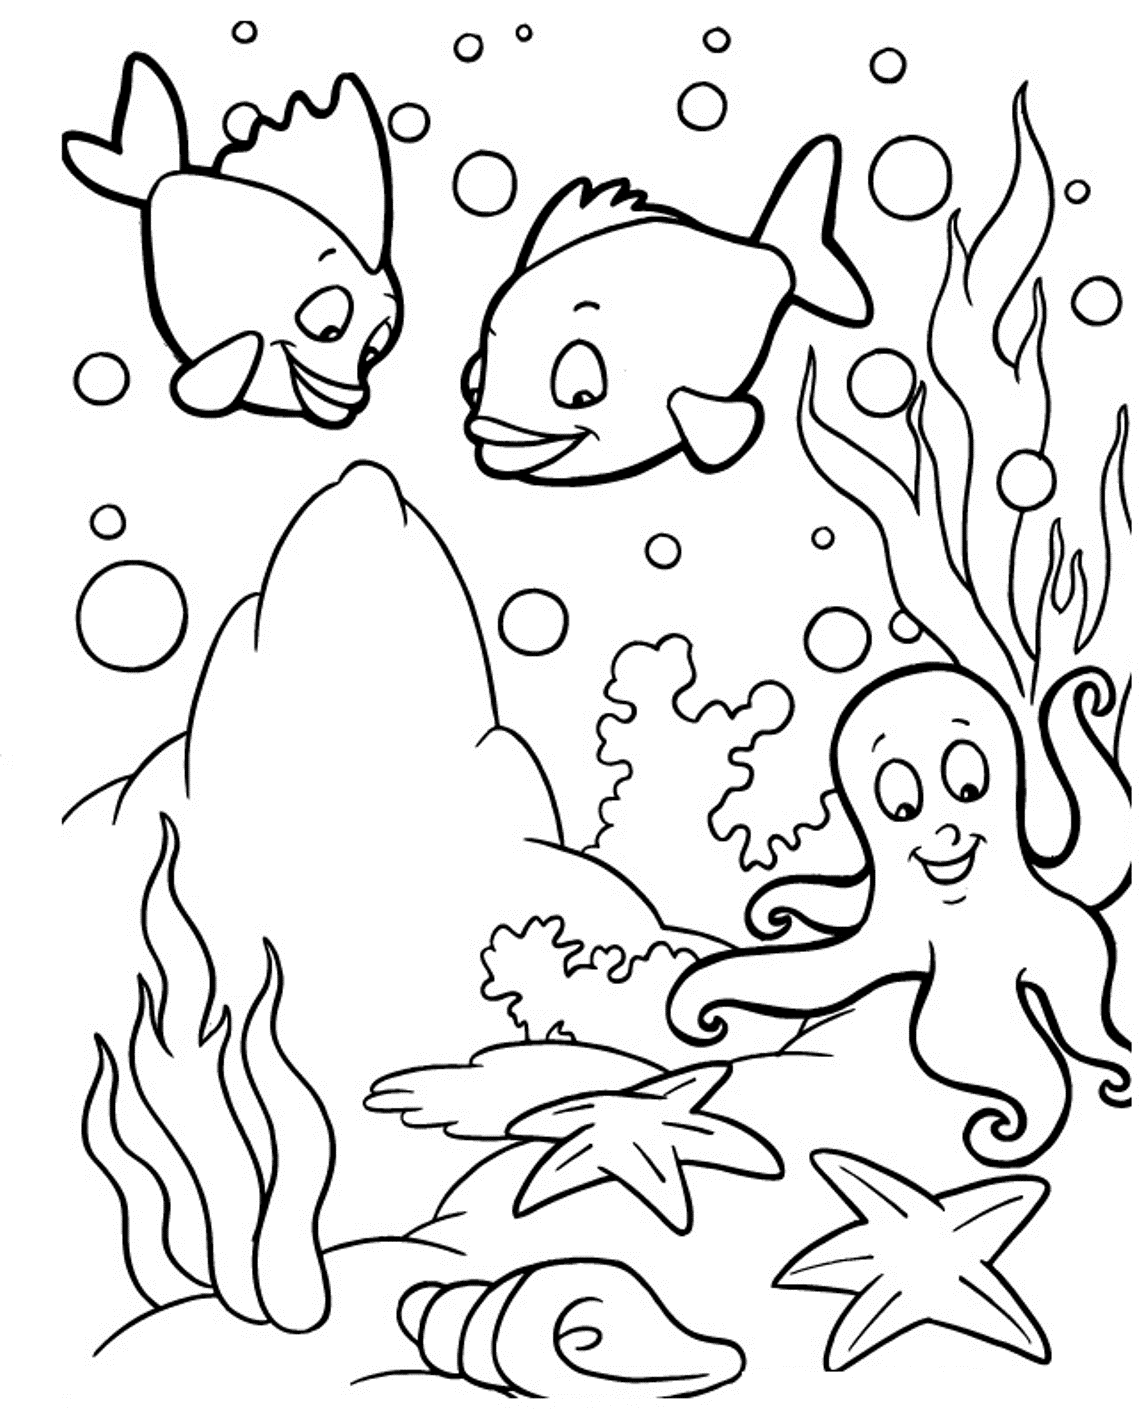 Animal Coloring Pages For Children   Coloring Home